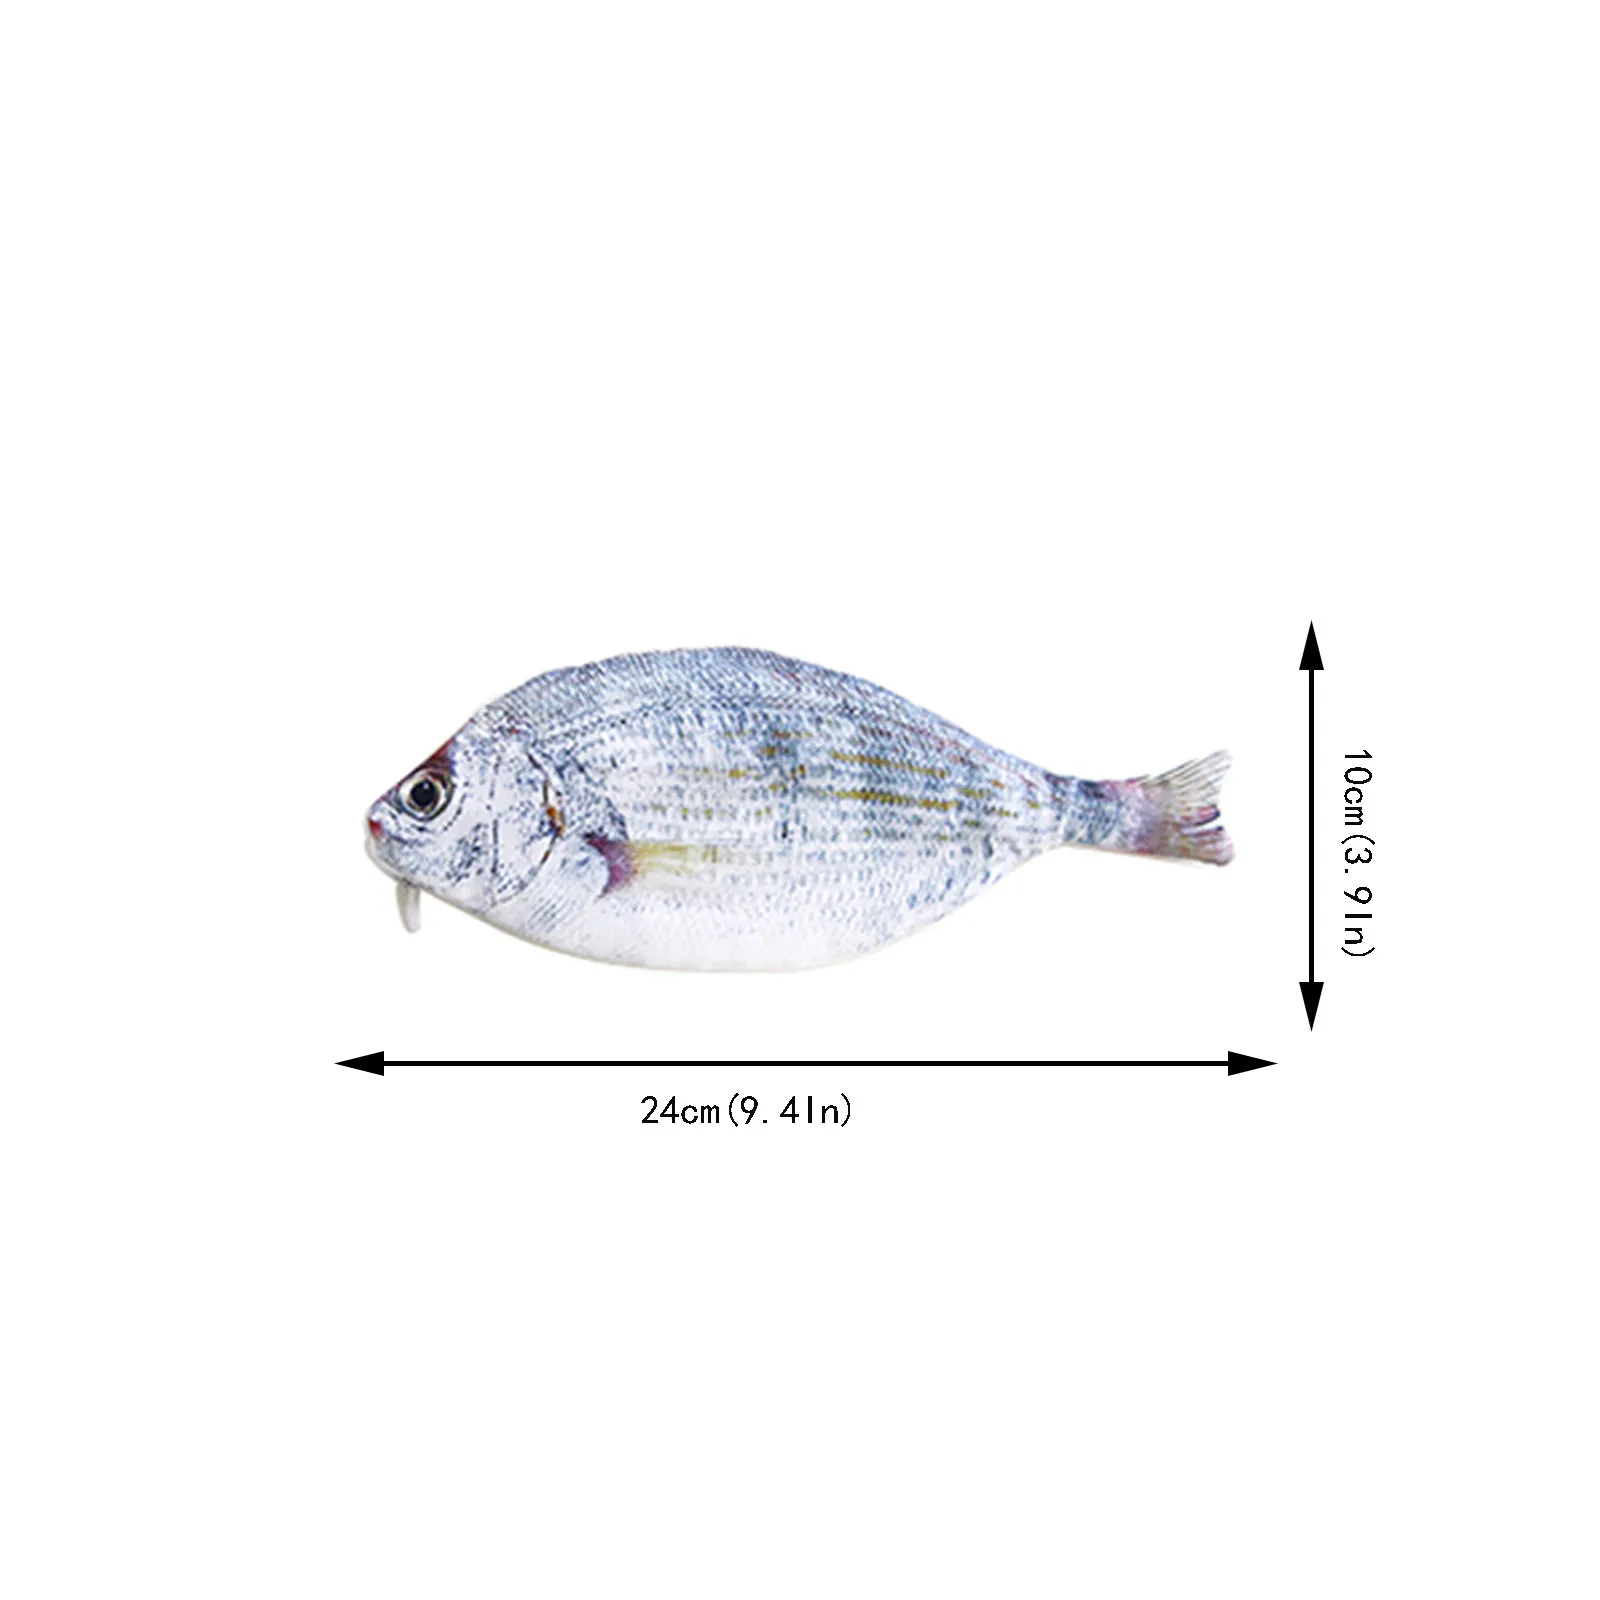 Wholesale Fish Pen Bag Personality Imitation Fish Shape Pencil Case  Creative Loth Pencils Bags School Student Stationery Pen Bag SN3451 From  Springfang, $2.09